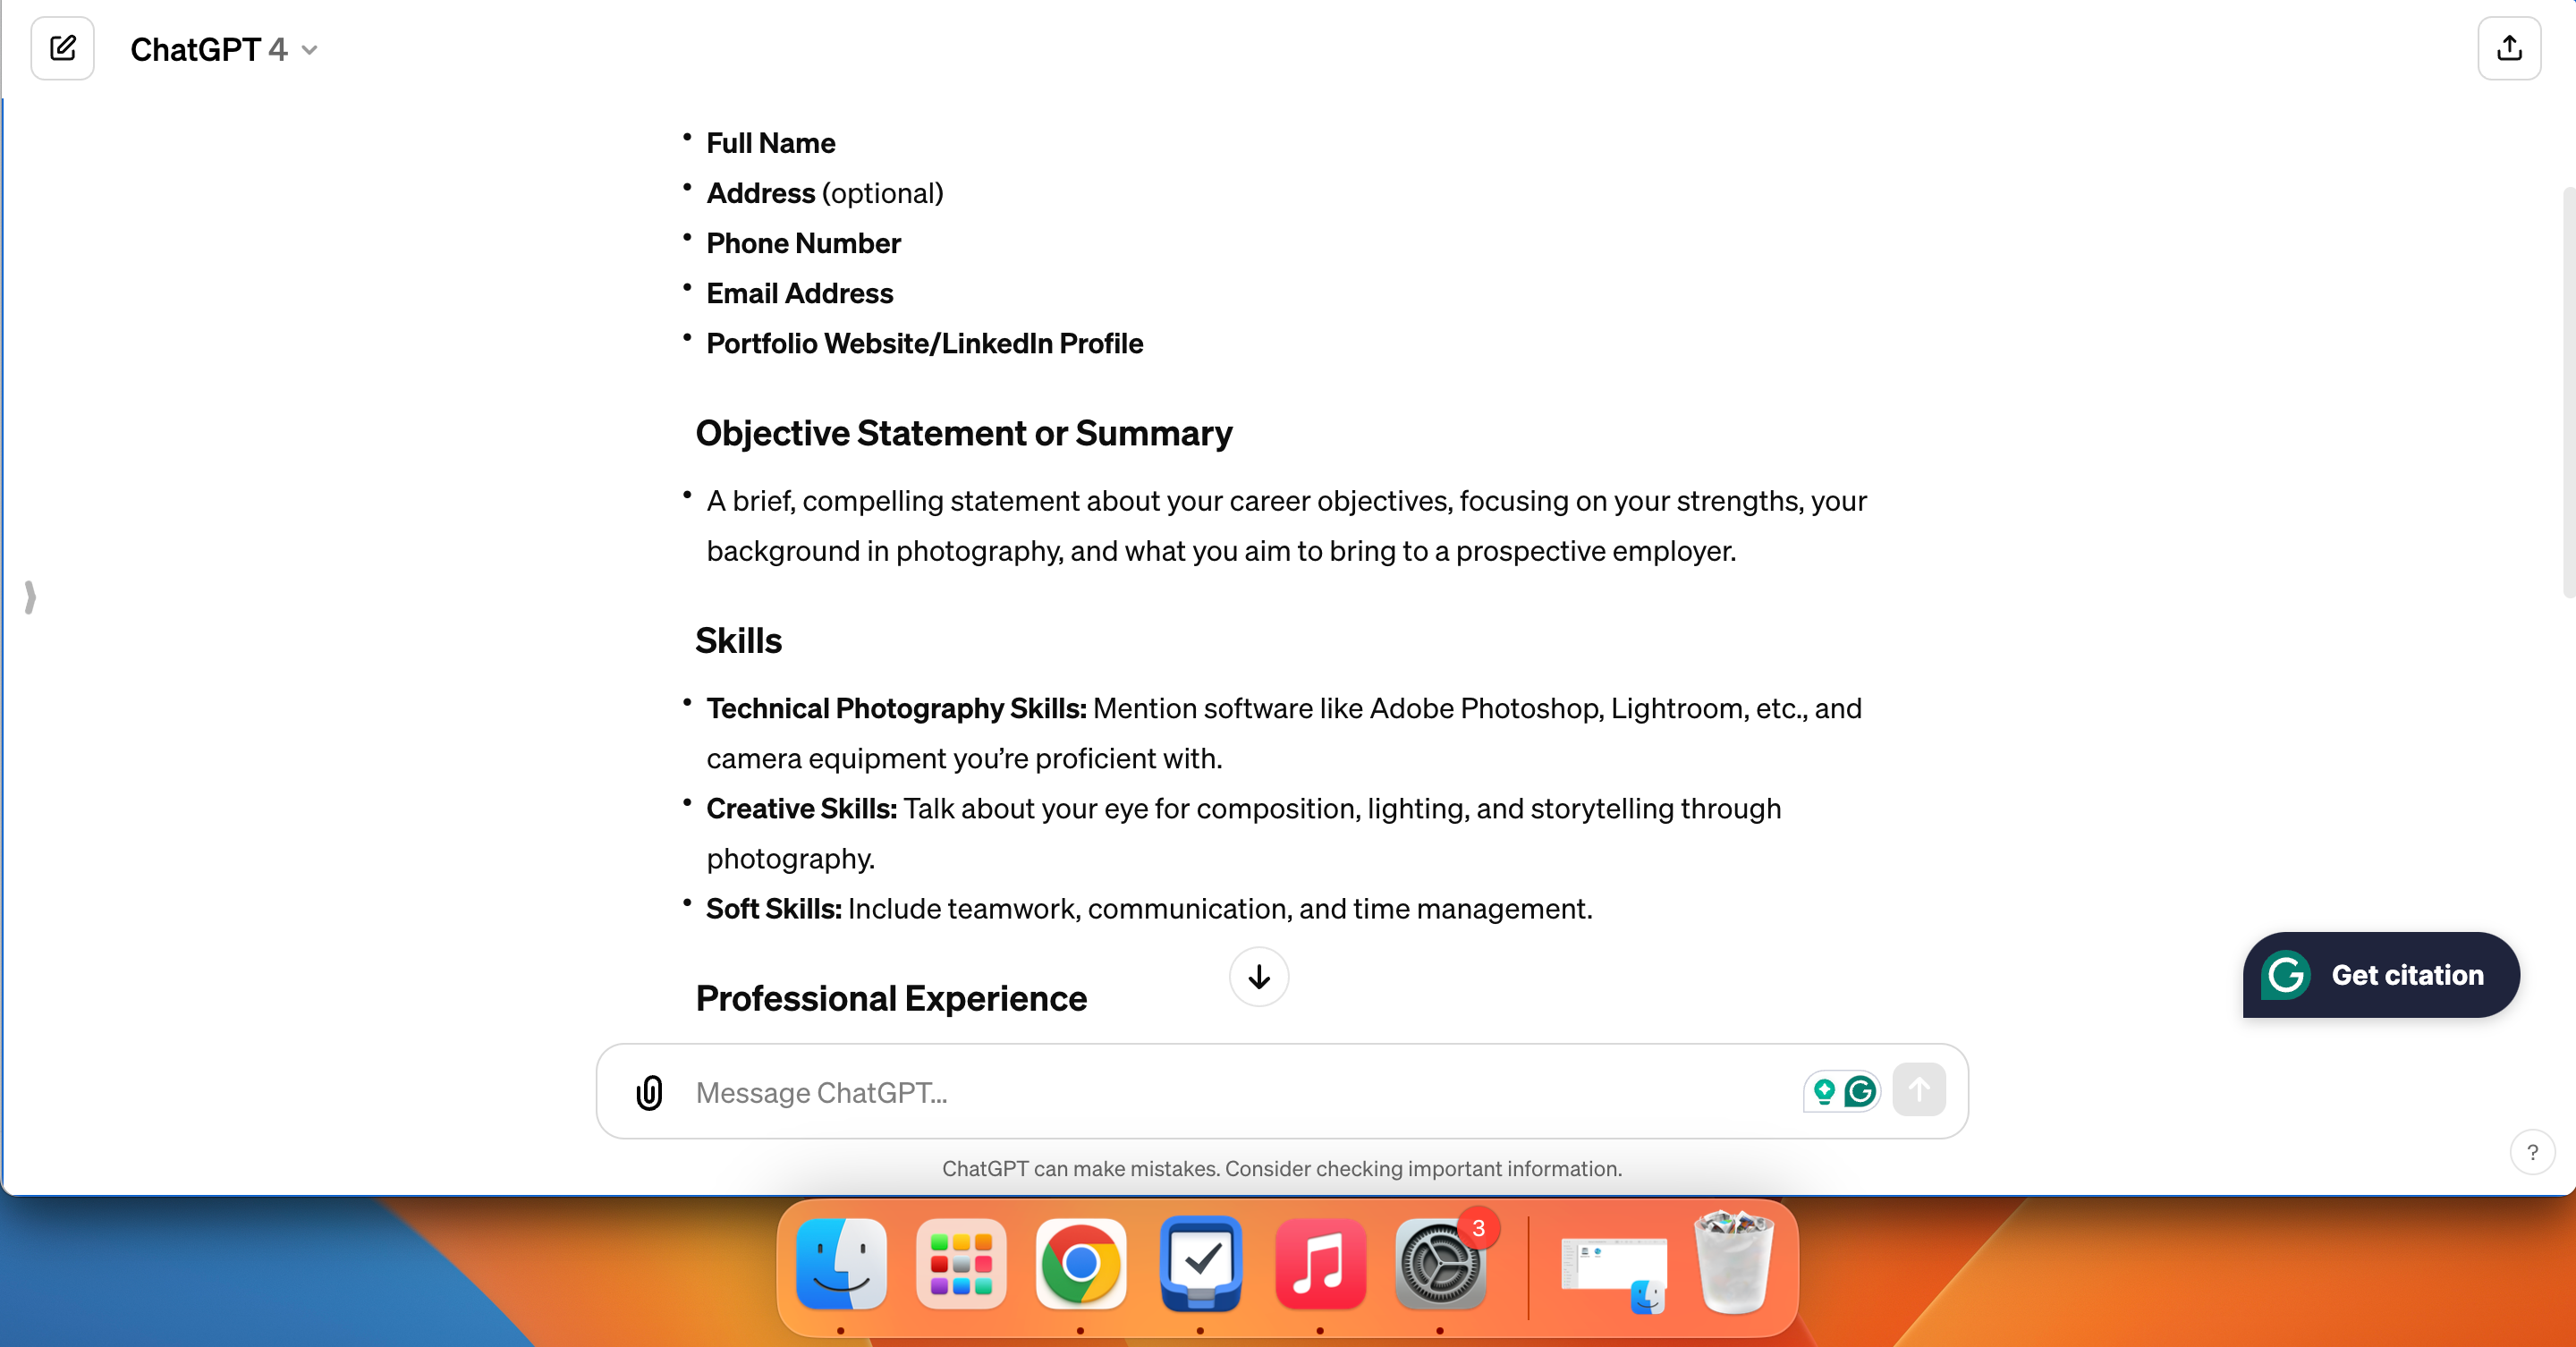 A resume outline developed with ChatGPT